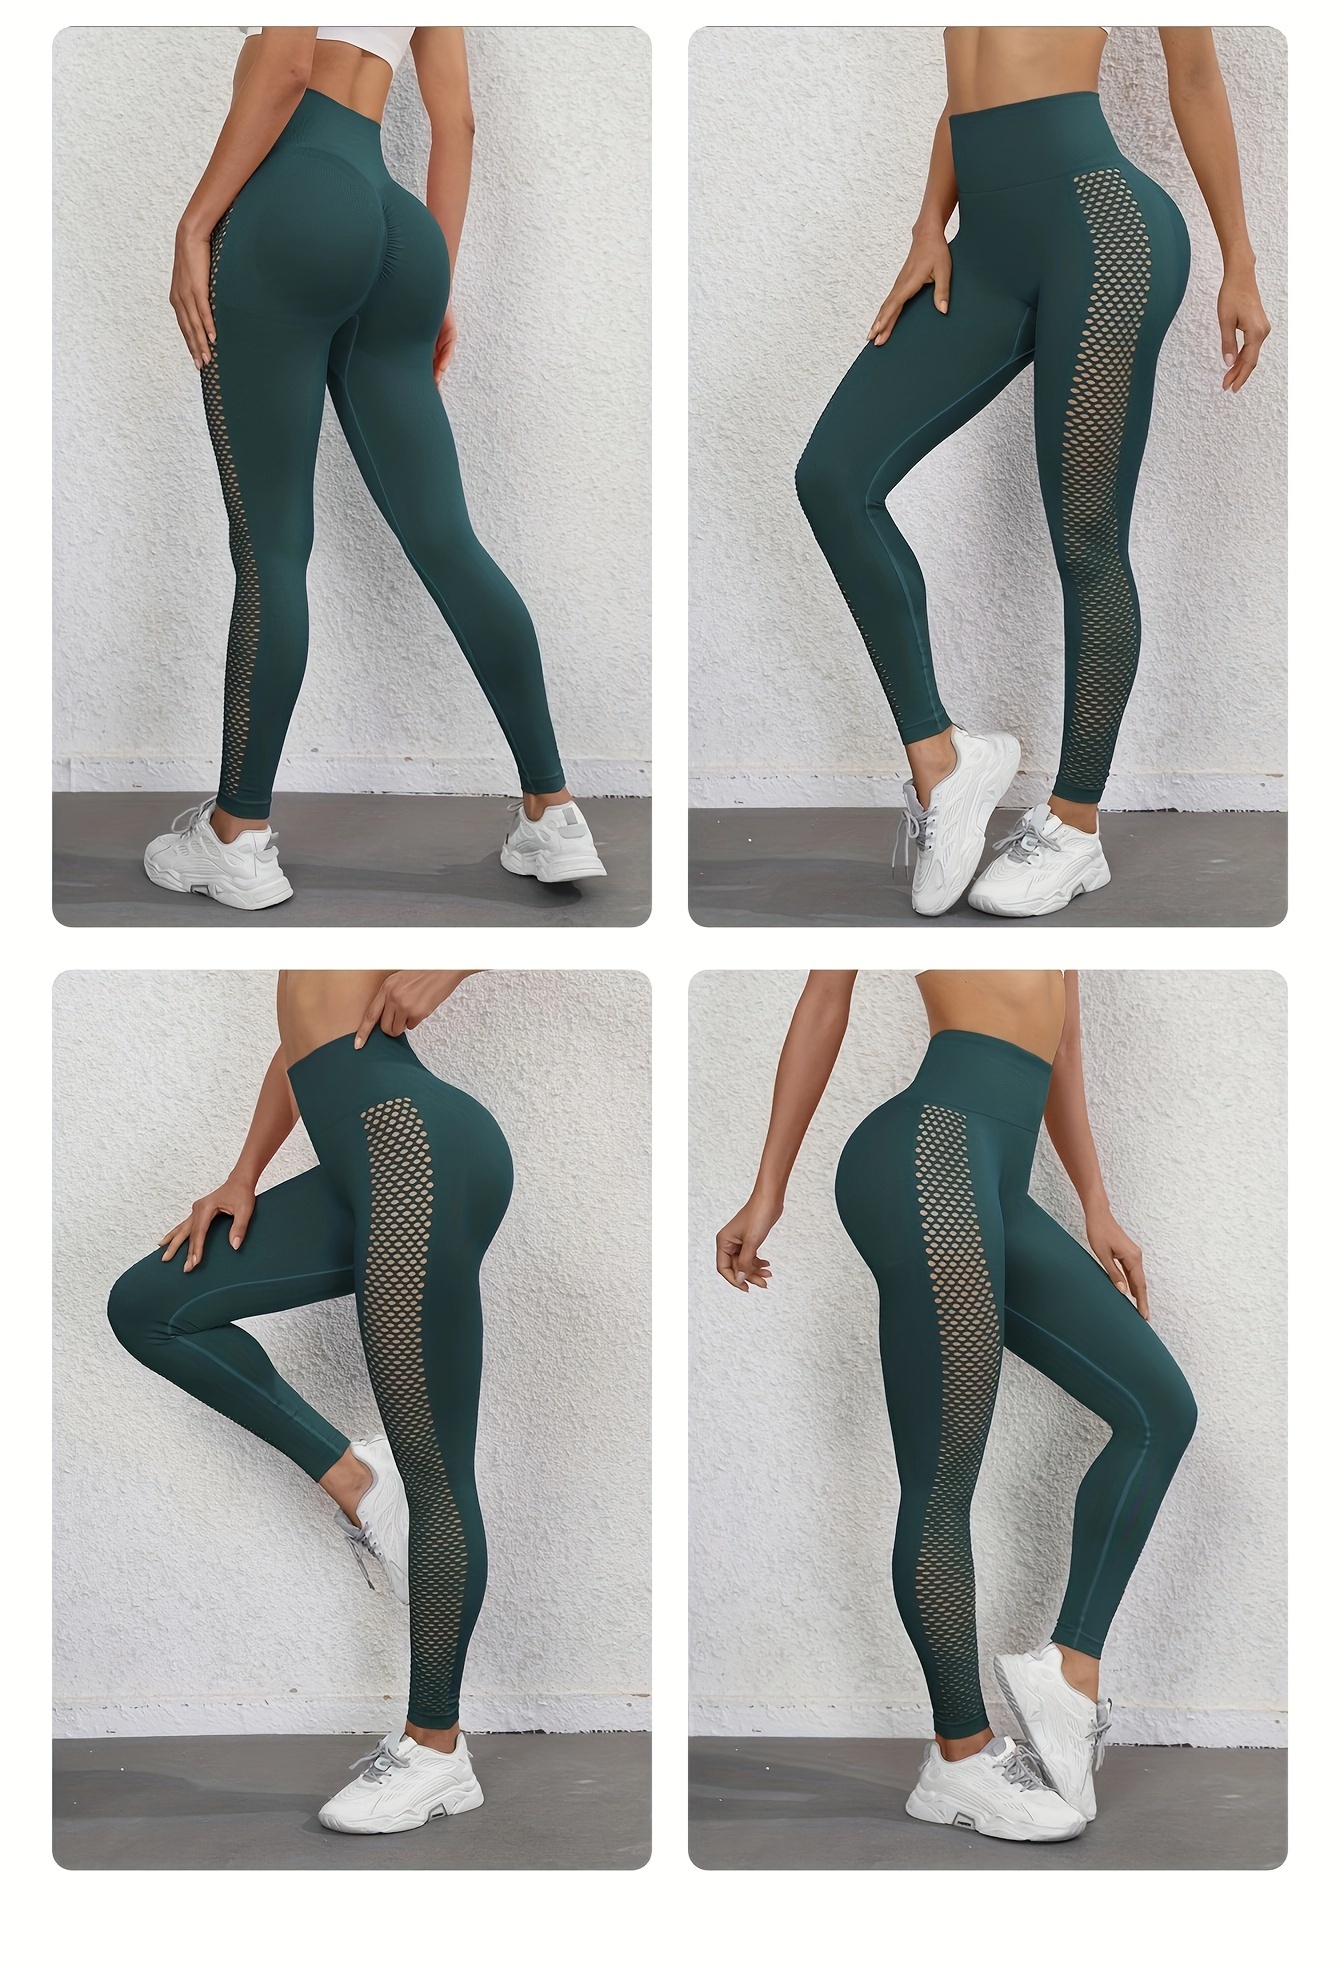 YHWW Leggings,Sport Gym Fitness 7/8 Length Leggings Women Bare Matte Soft  Workout Training Yoga Pants Tights 10 OceanTeal : : Clothing,  Shoes & Accessories